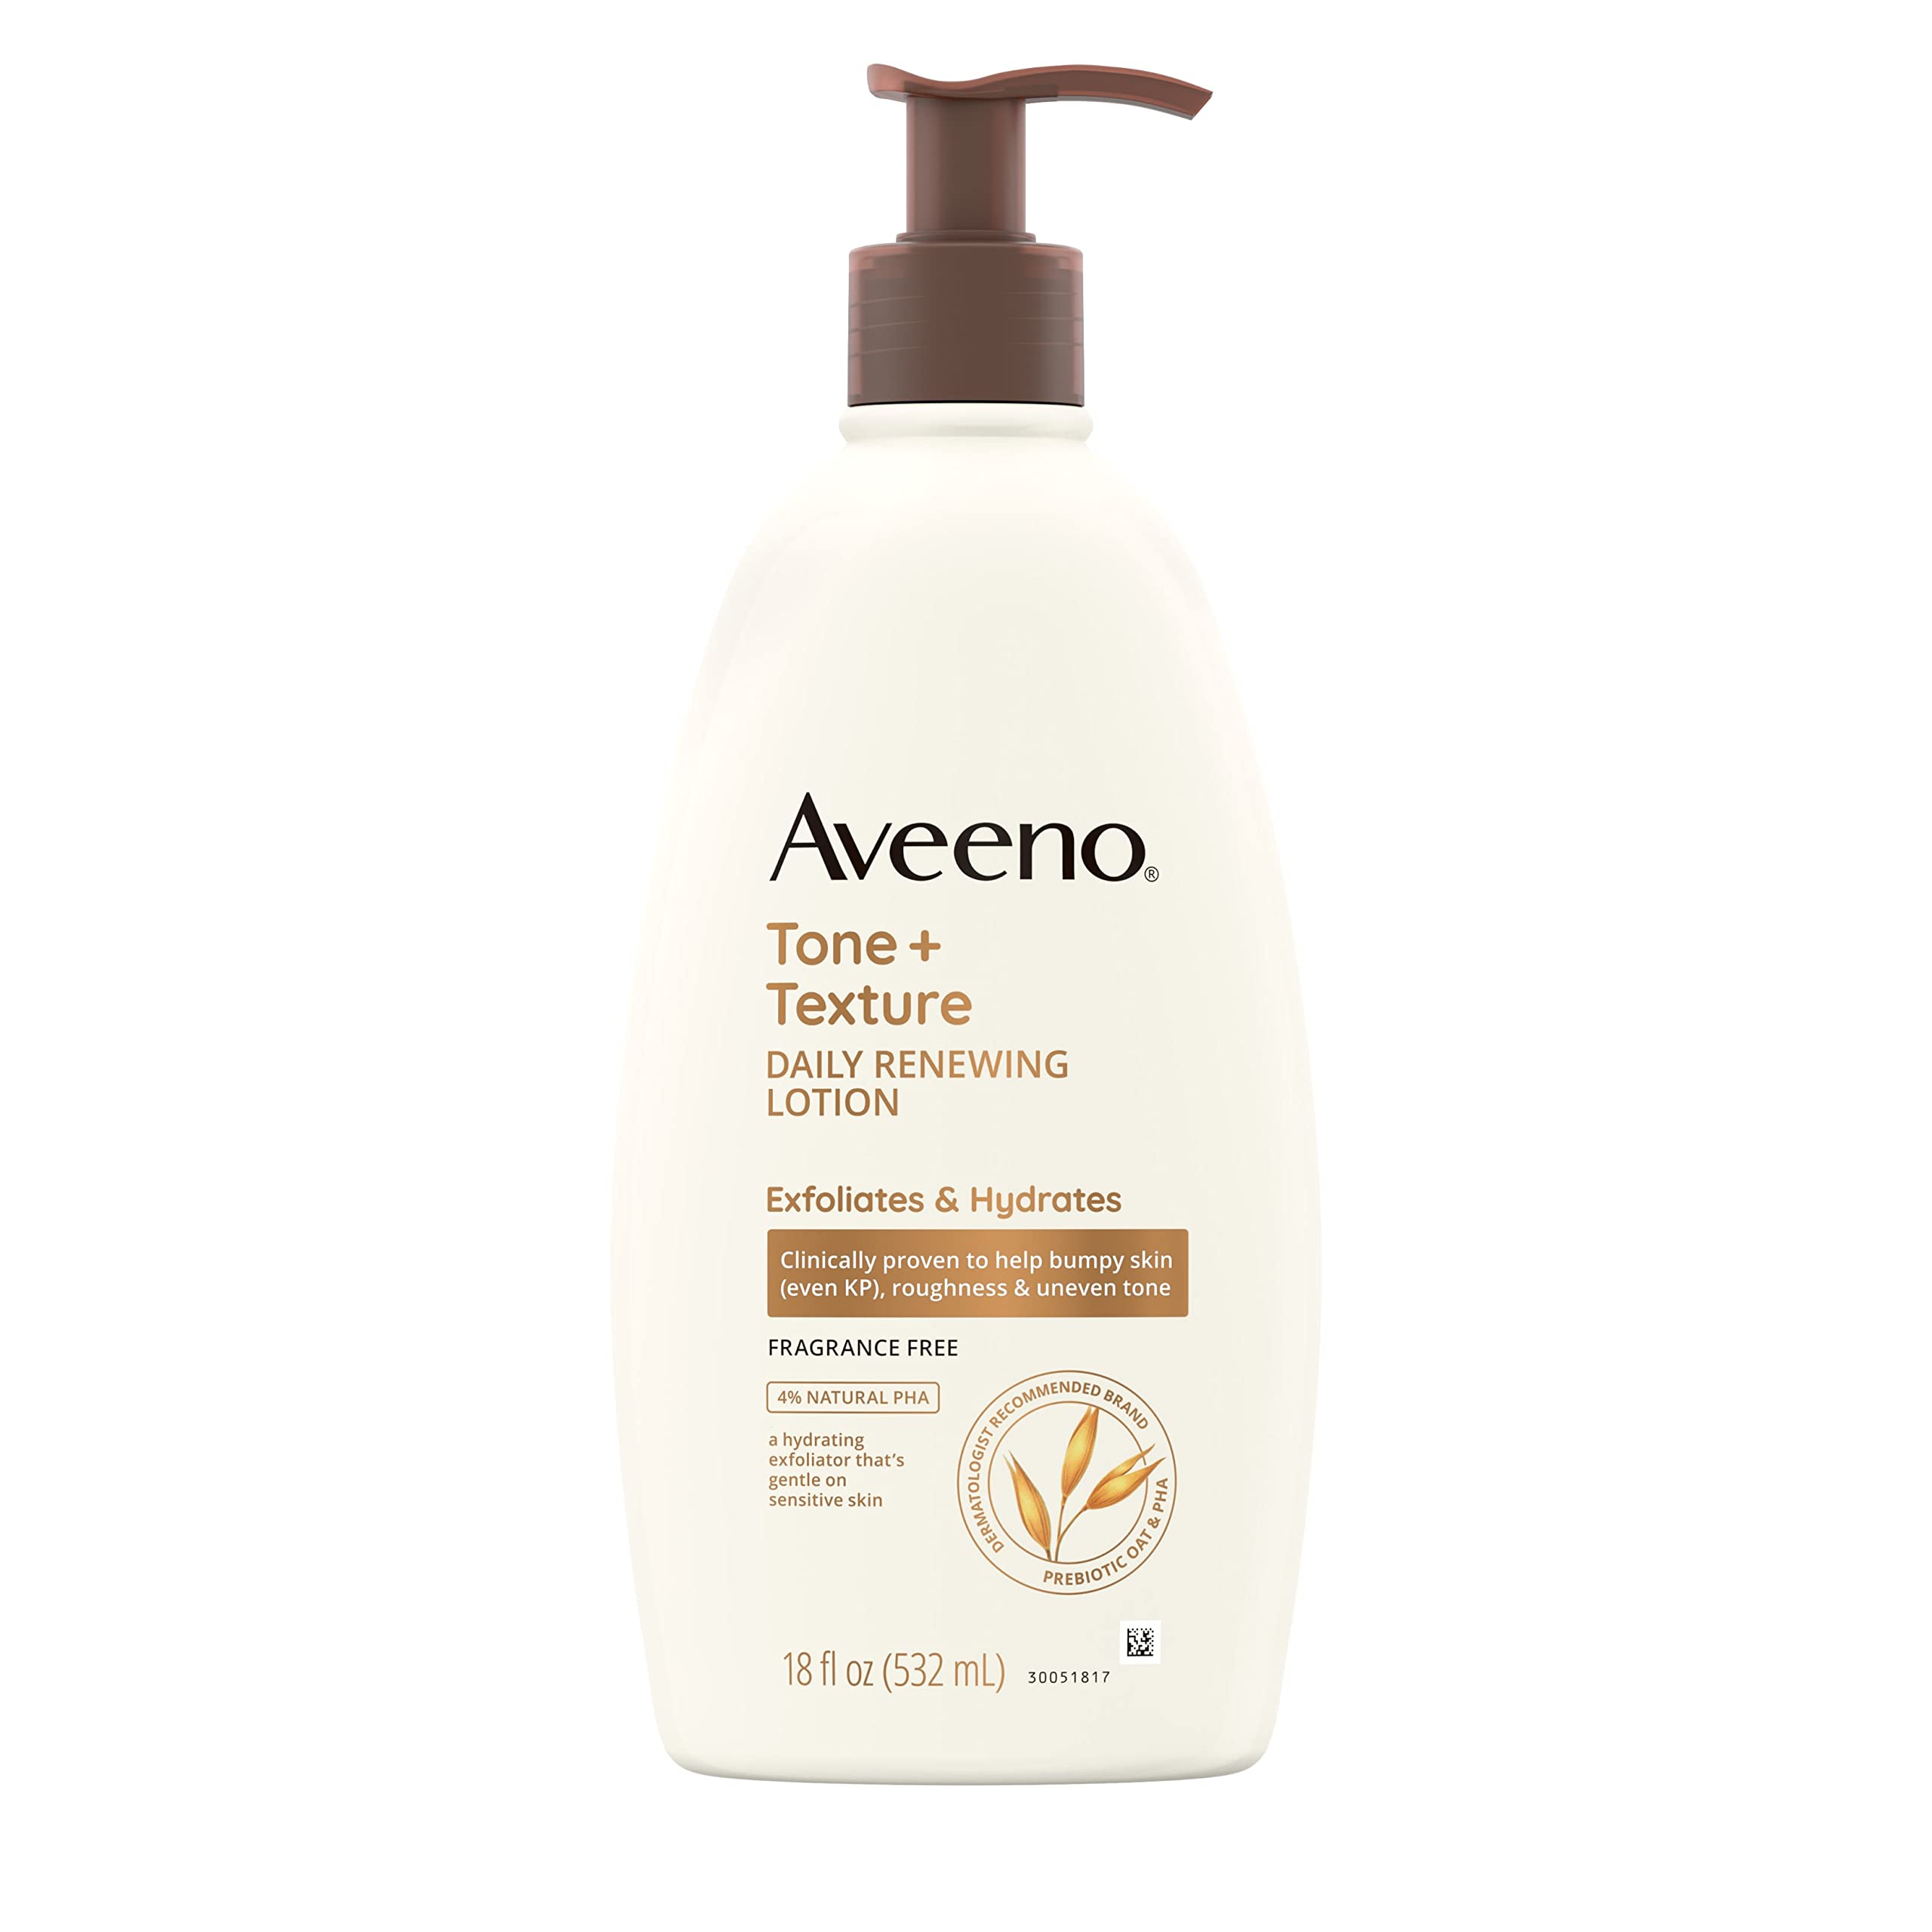 Aveeno Tone + Texture Daily Renewing Lotion With Prebiotic Oat, Gentle Lotion Exfoliates & Hydrates Sensitive Skin, Clinically Proven to Help Bumpy, Rough Skin, Fragrance-Free, 18 Fl. Oz